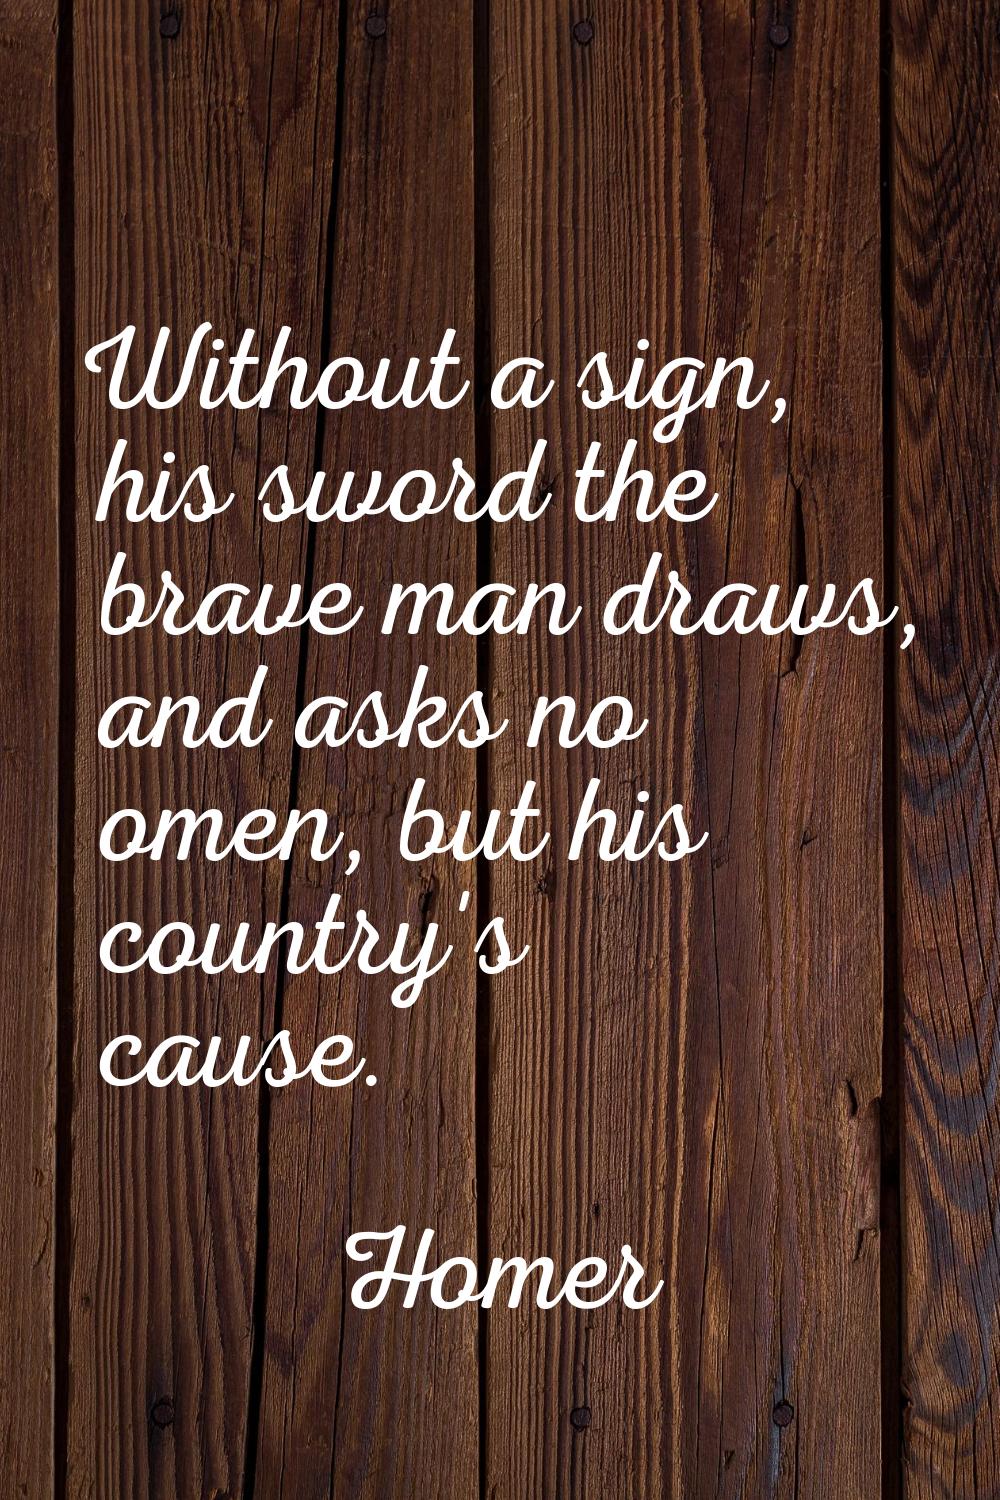 Without a sign, his sword the brave man draws, and asks no omen, but his country's cause.